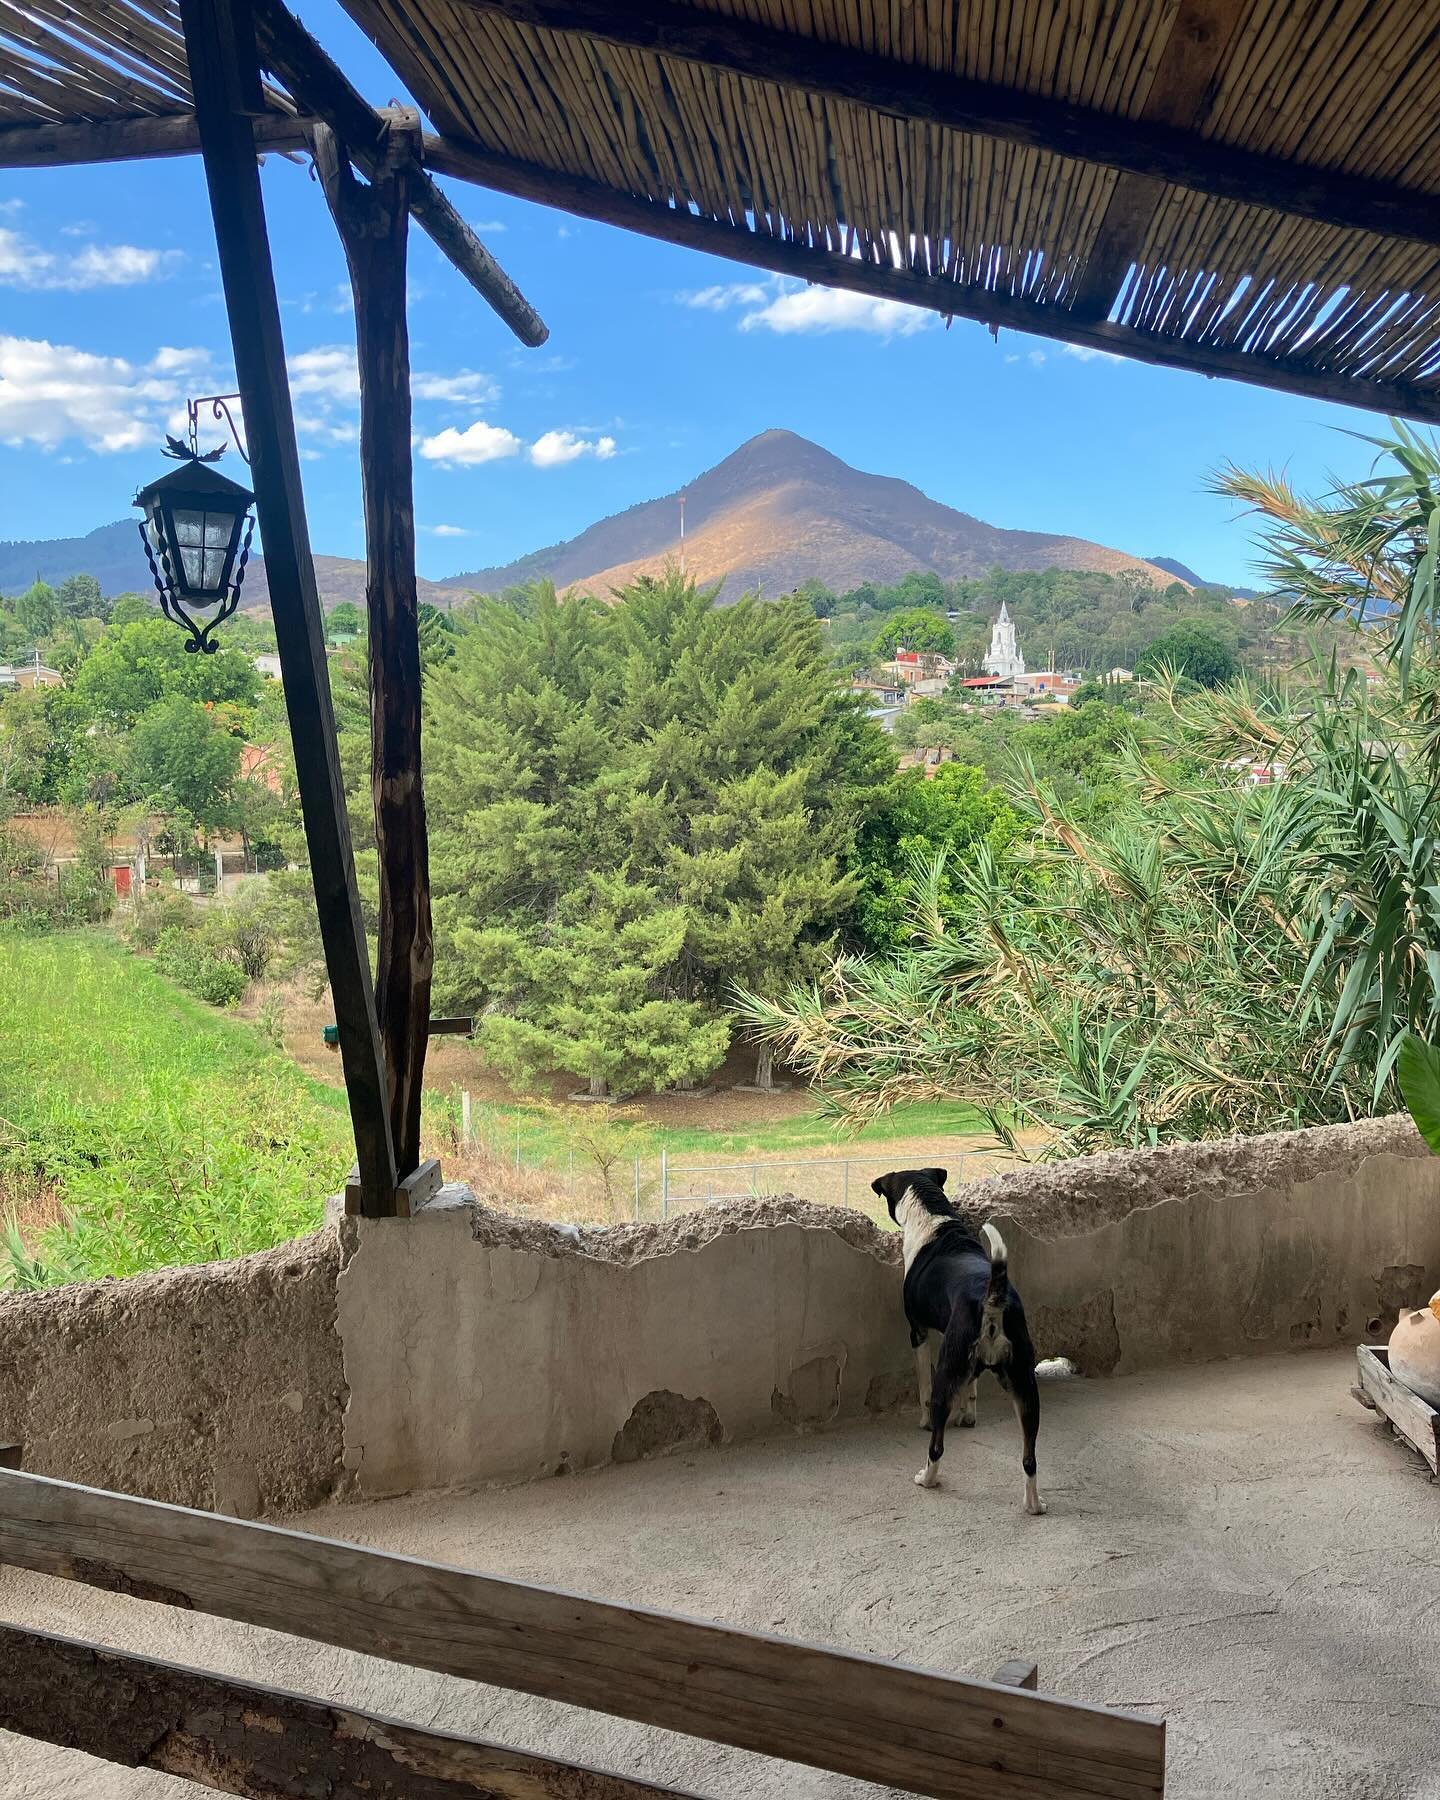 After several weeks in and around Oaxaca City, I needed to retreat to the mountains and the small town of San Agust&iacute;n Etla was just what I needed. ⁣
⁣
A place where everyone knows one another by name, where goats and cows roam the dirt streets